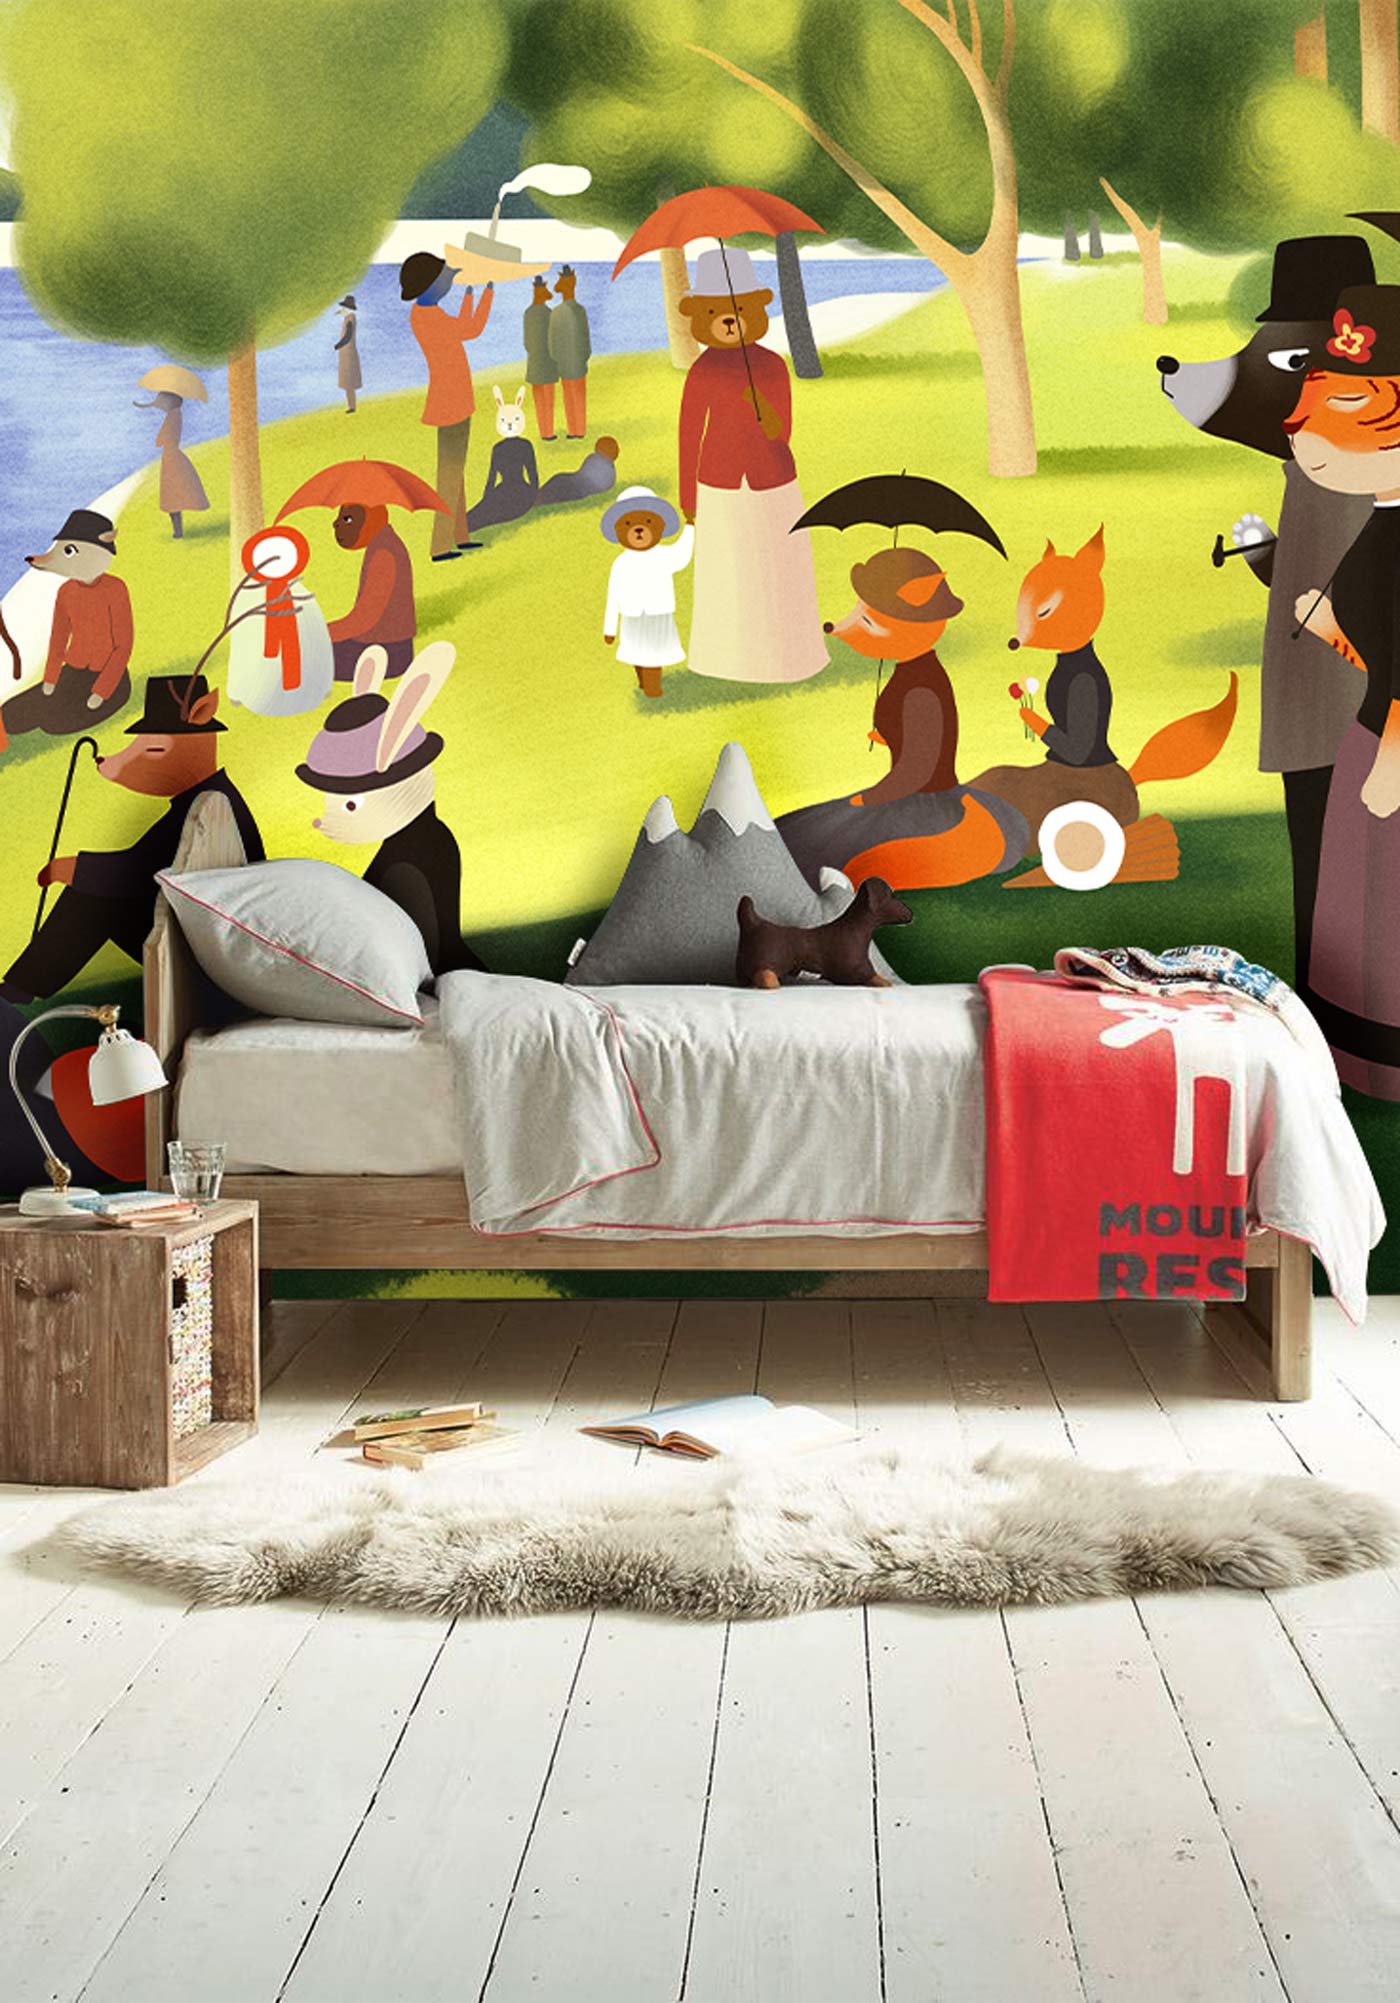 Animals in the Park Nursery Wallpaper Mural for Use in Decorating a Nursery